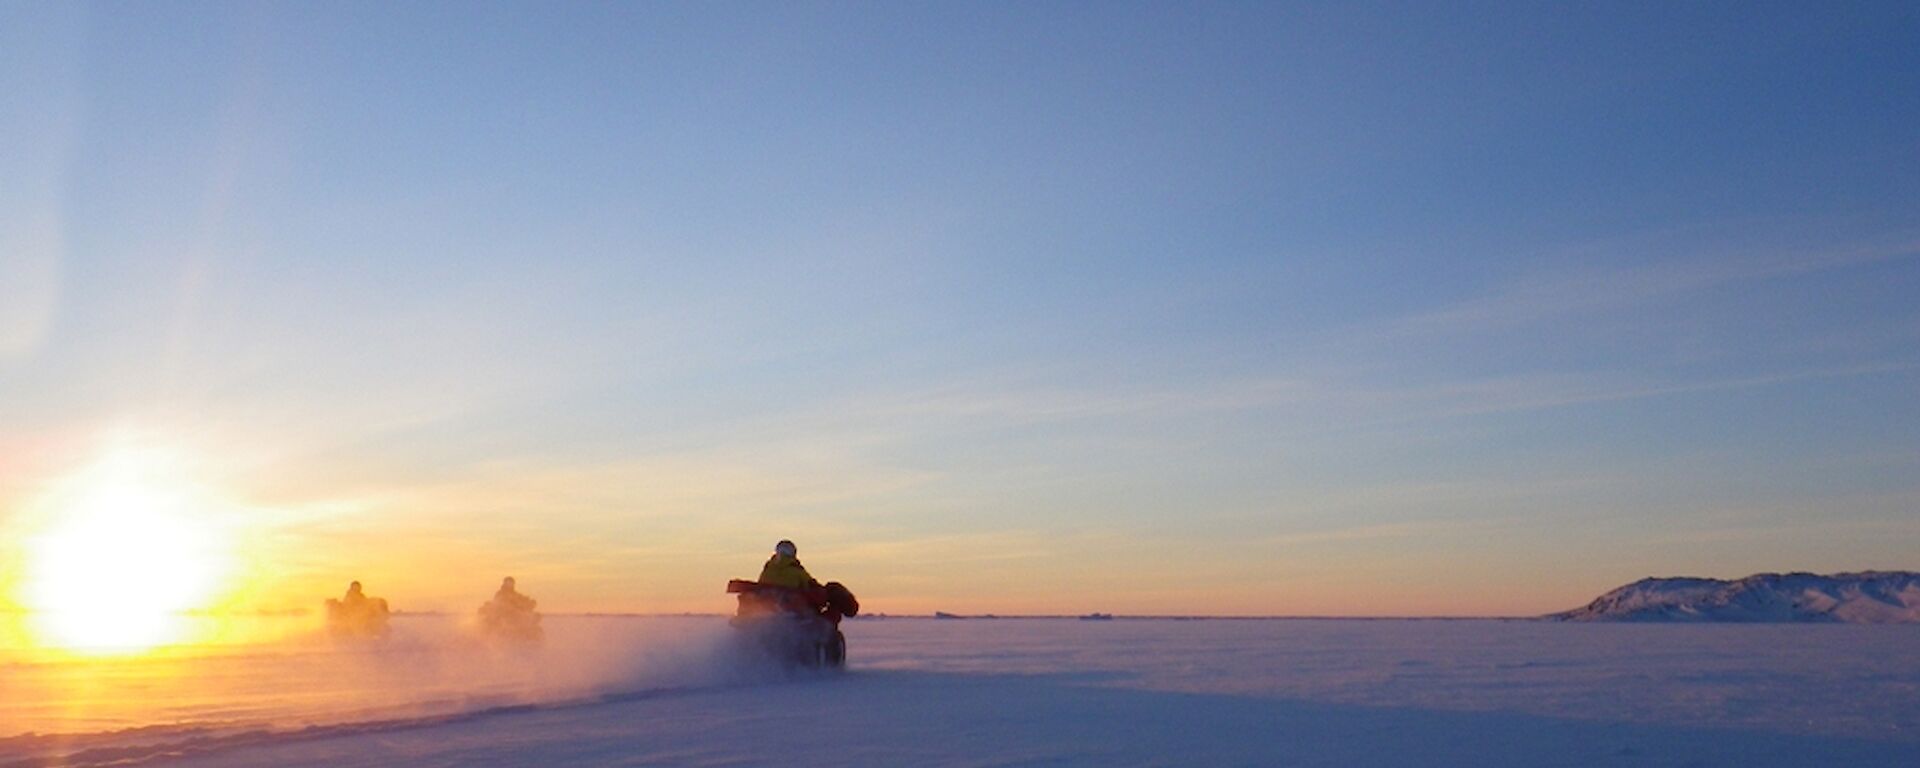 Expeditioners on three quads riding on the sea ice into the rising sun